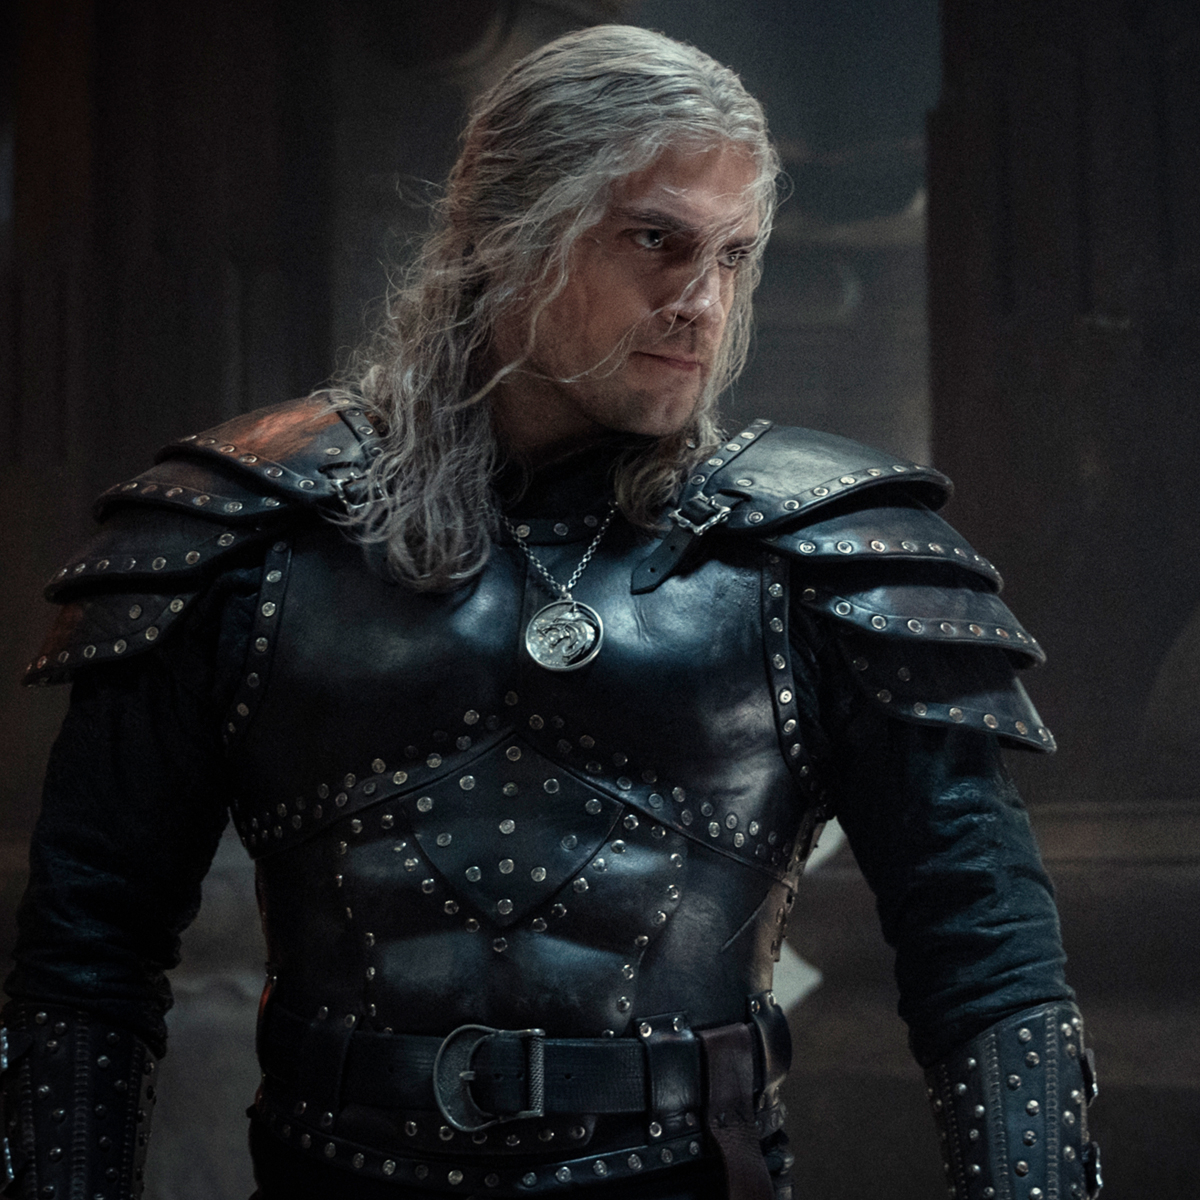 Liam Hemsworth's The Witcher Season 4 Recast Explained: Why Is